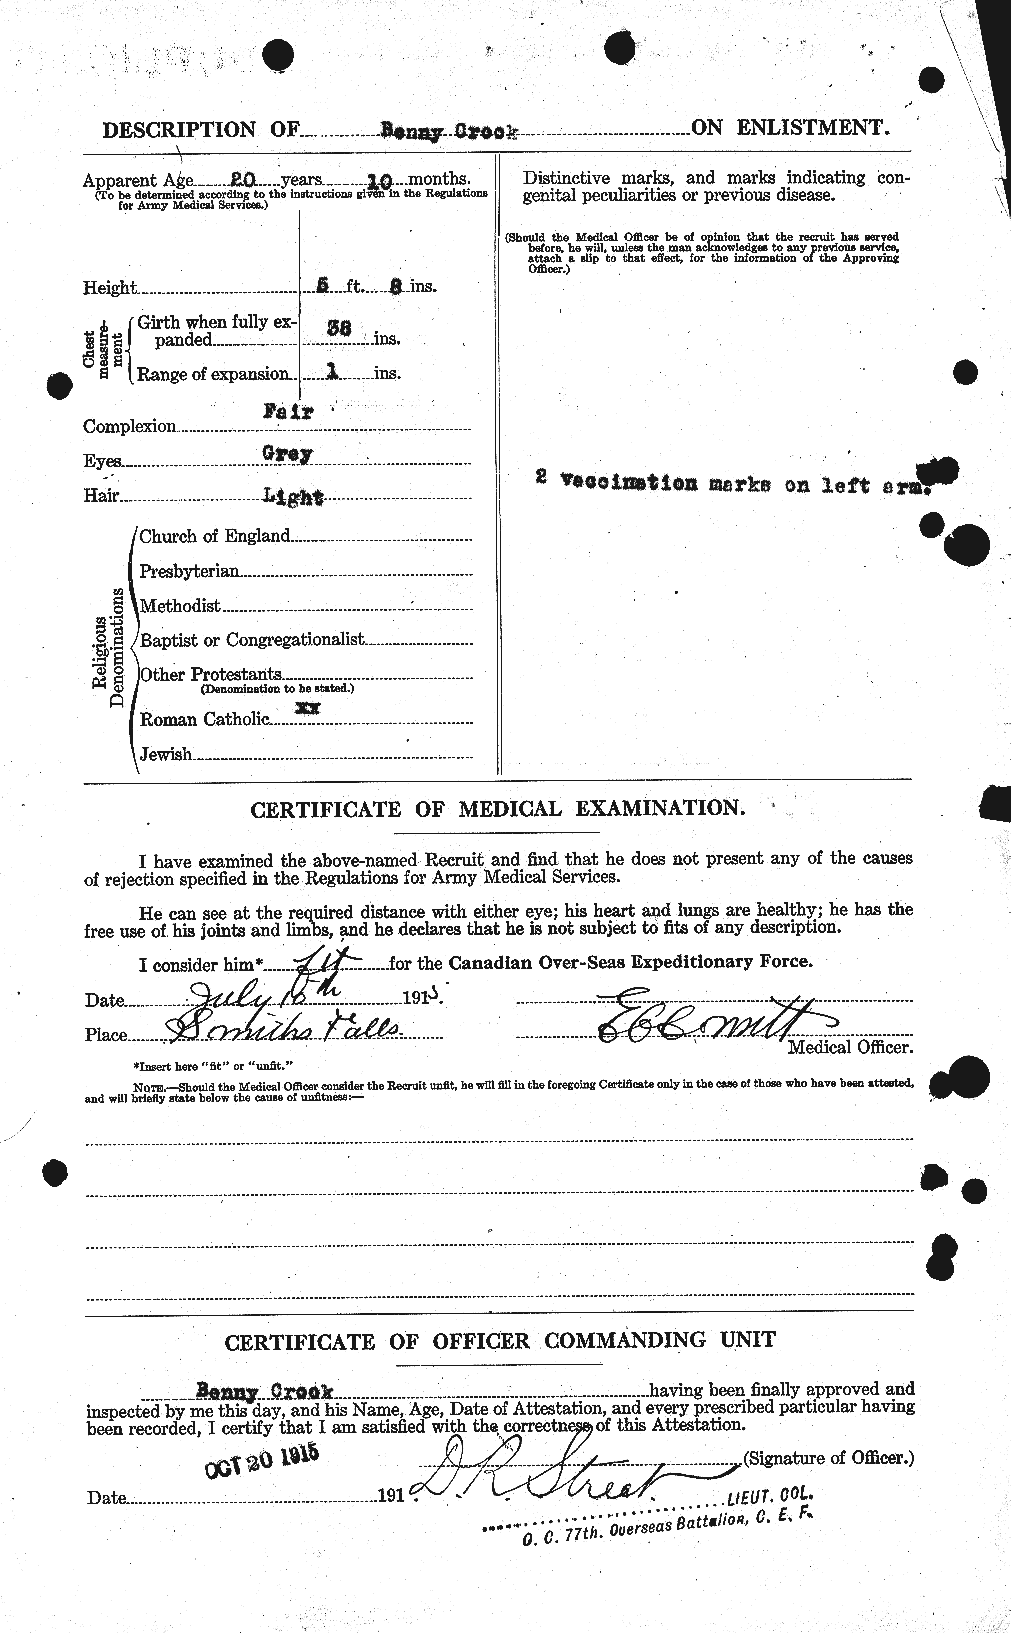 Personnel Records of the First World War - CEF 067244b